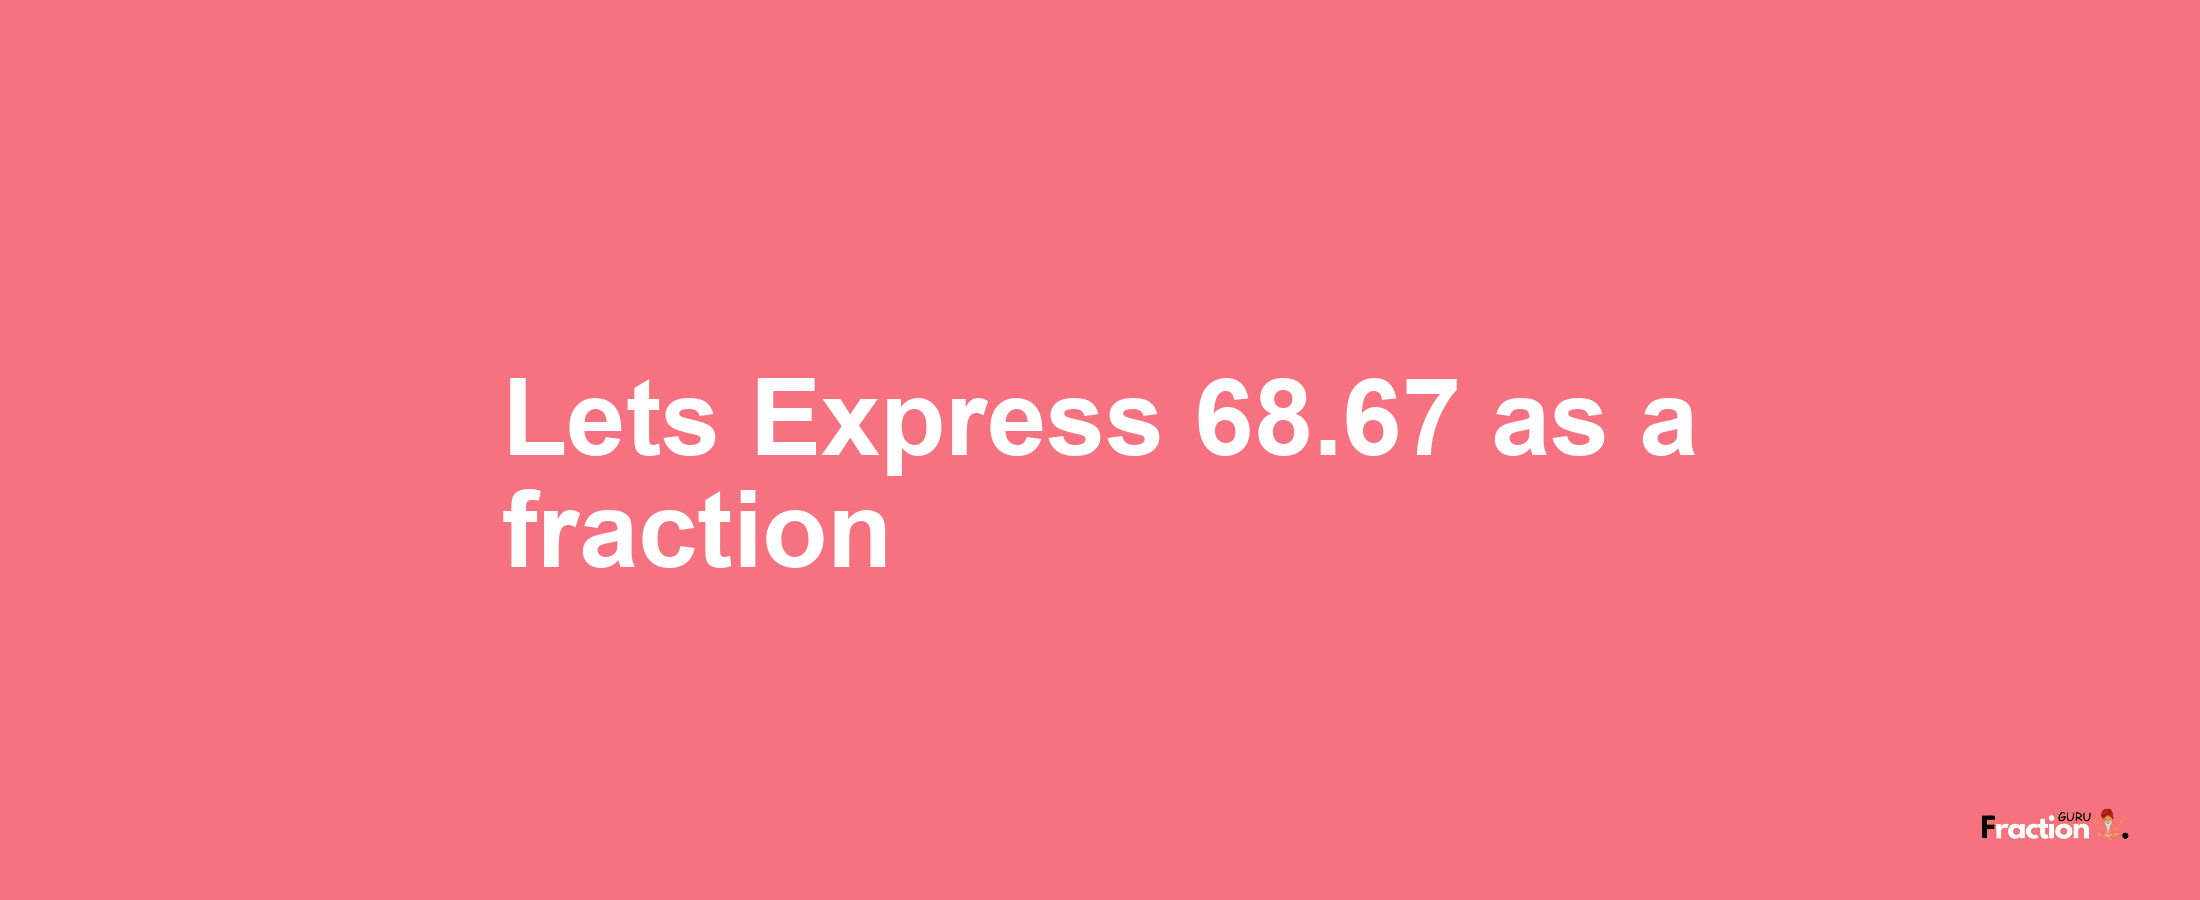 Lets Express 68.67 as afraction